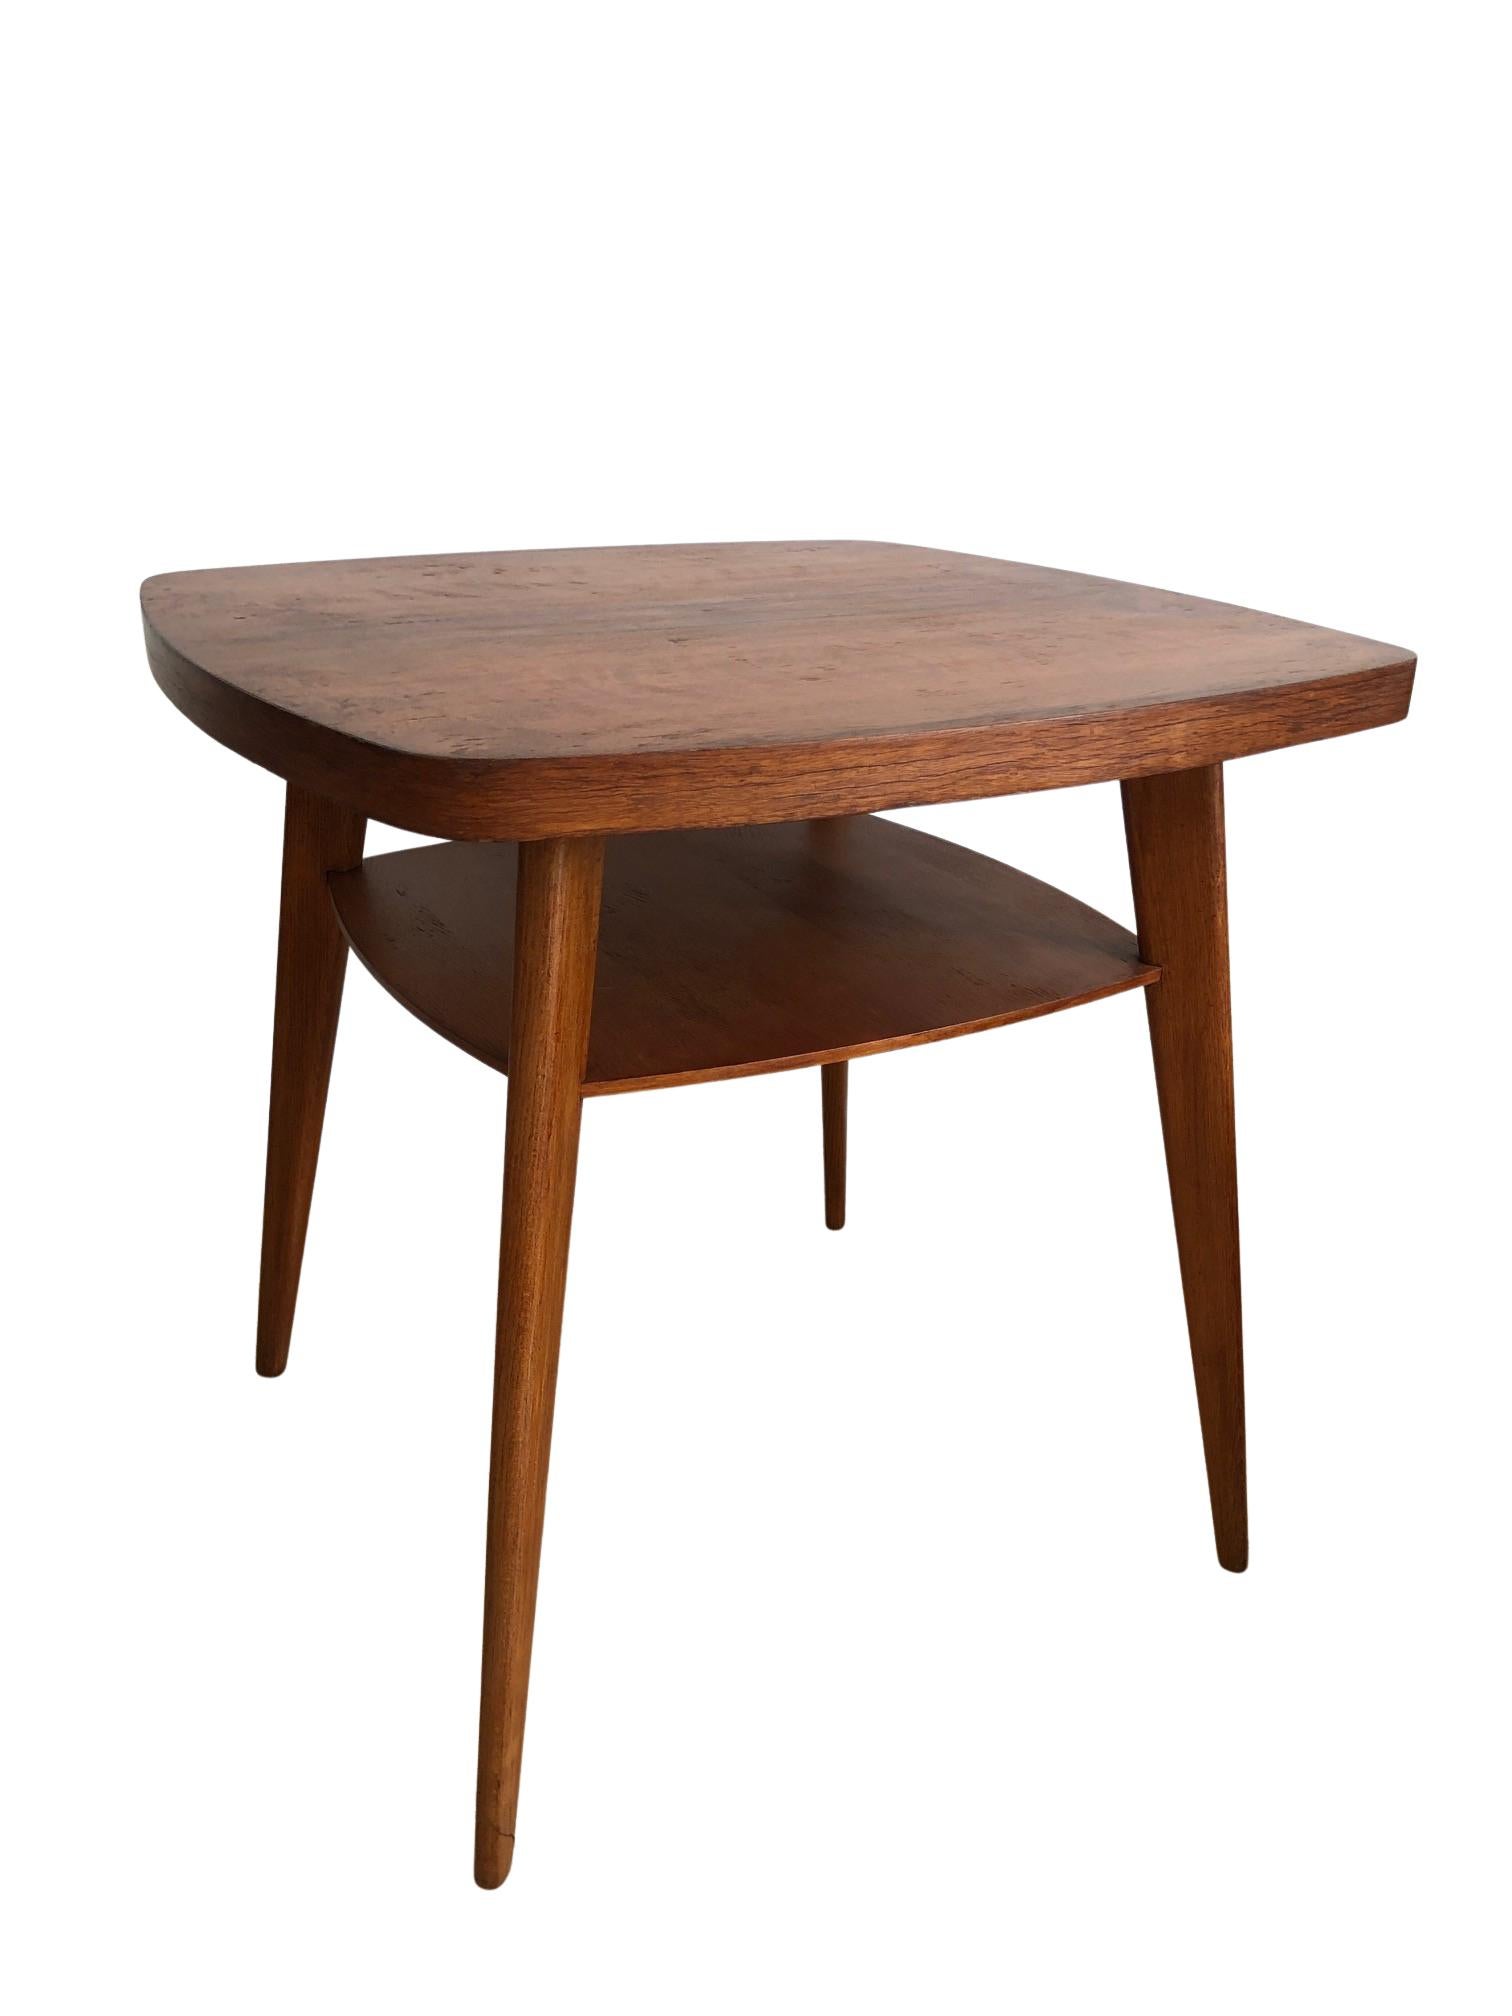 European Mid-Century Wooden Coffee Table, Europe, 1960s For Sale